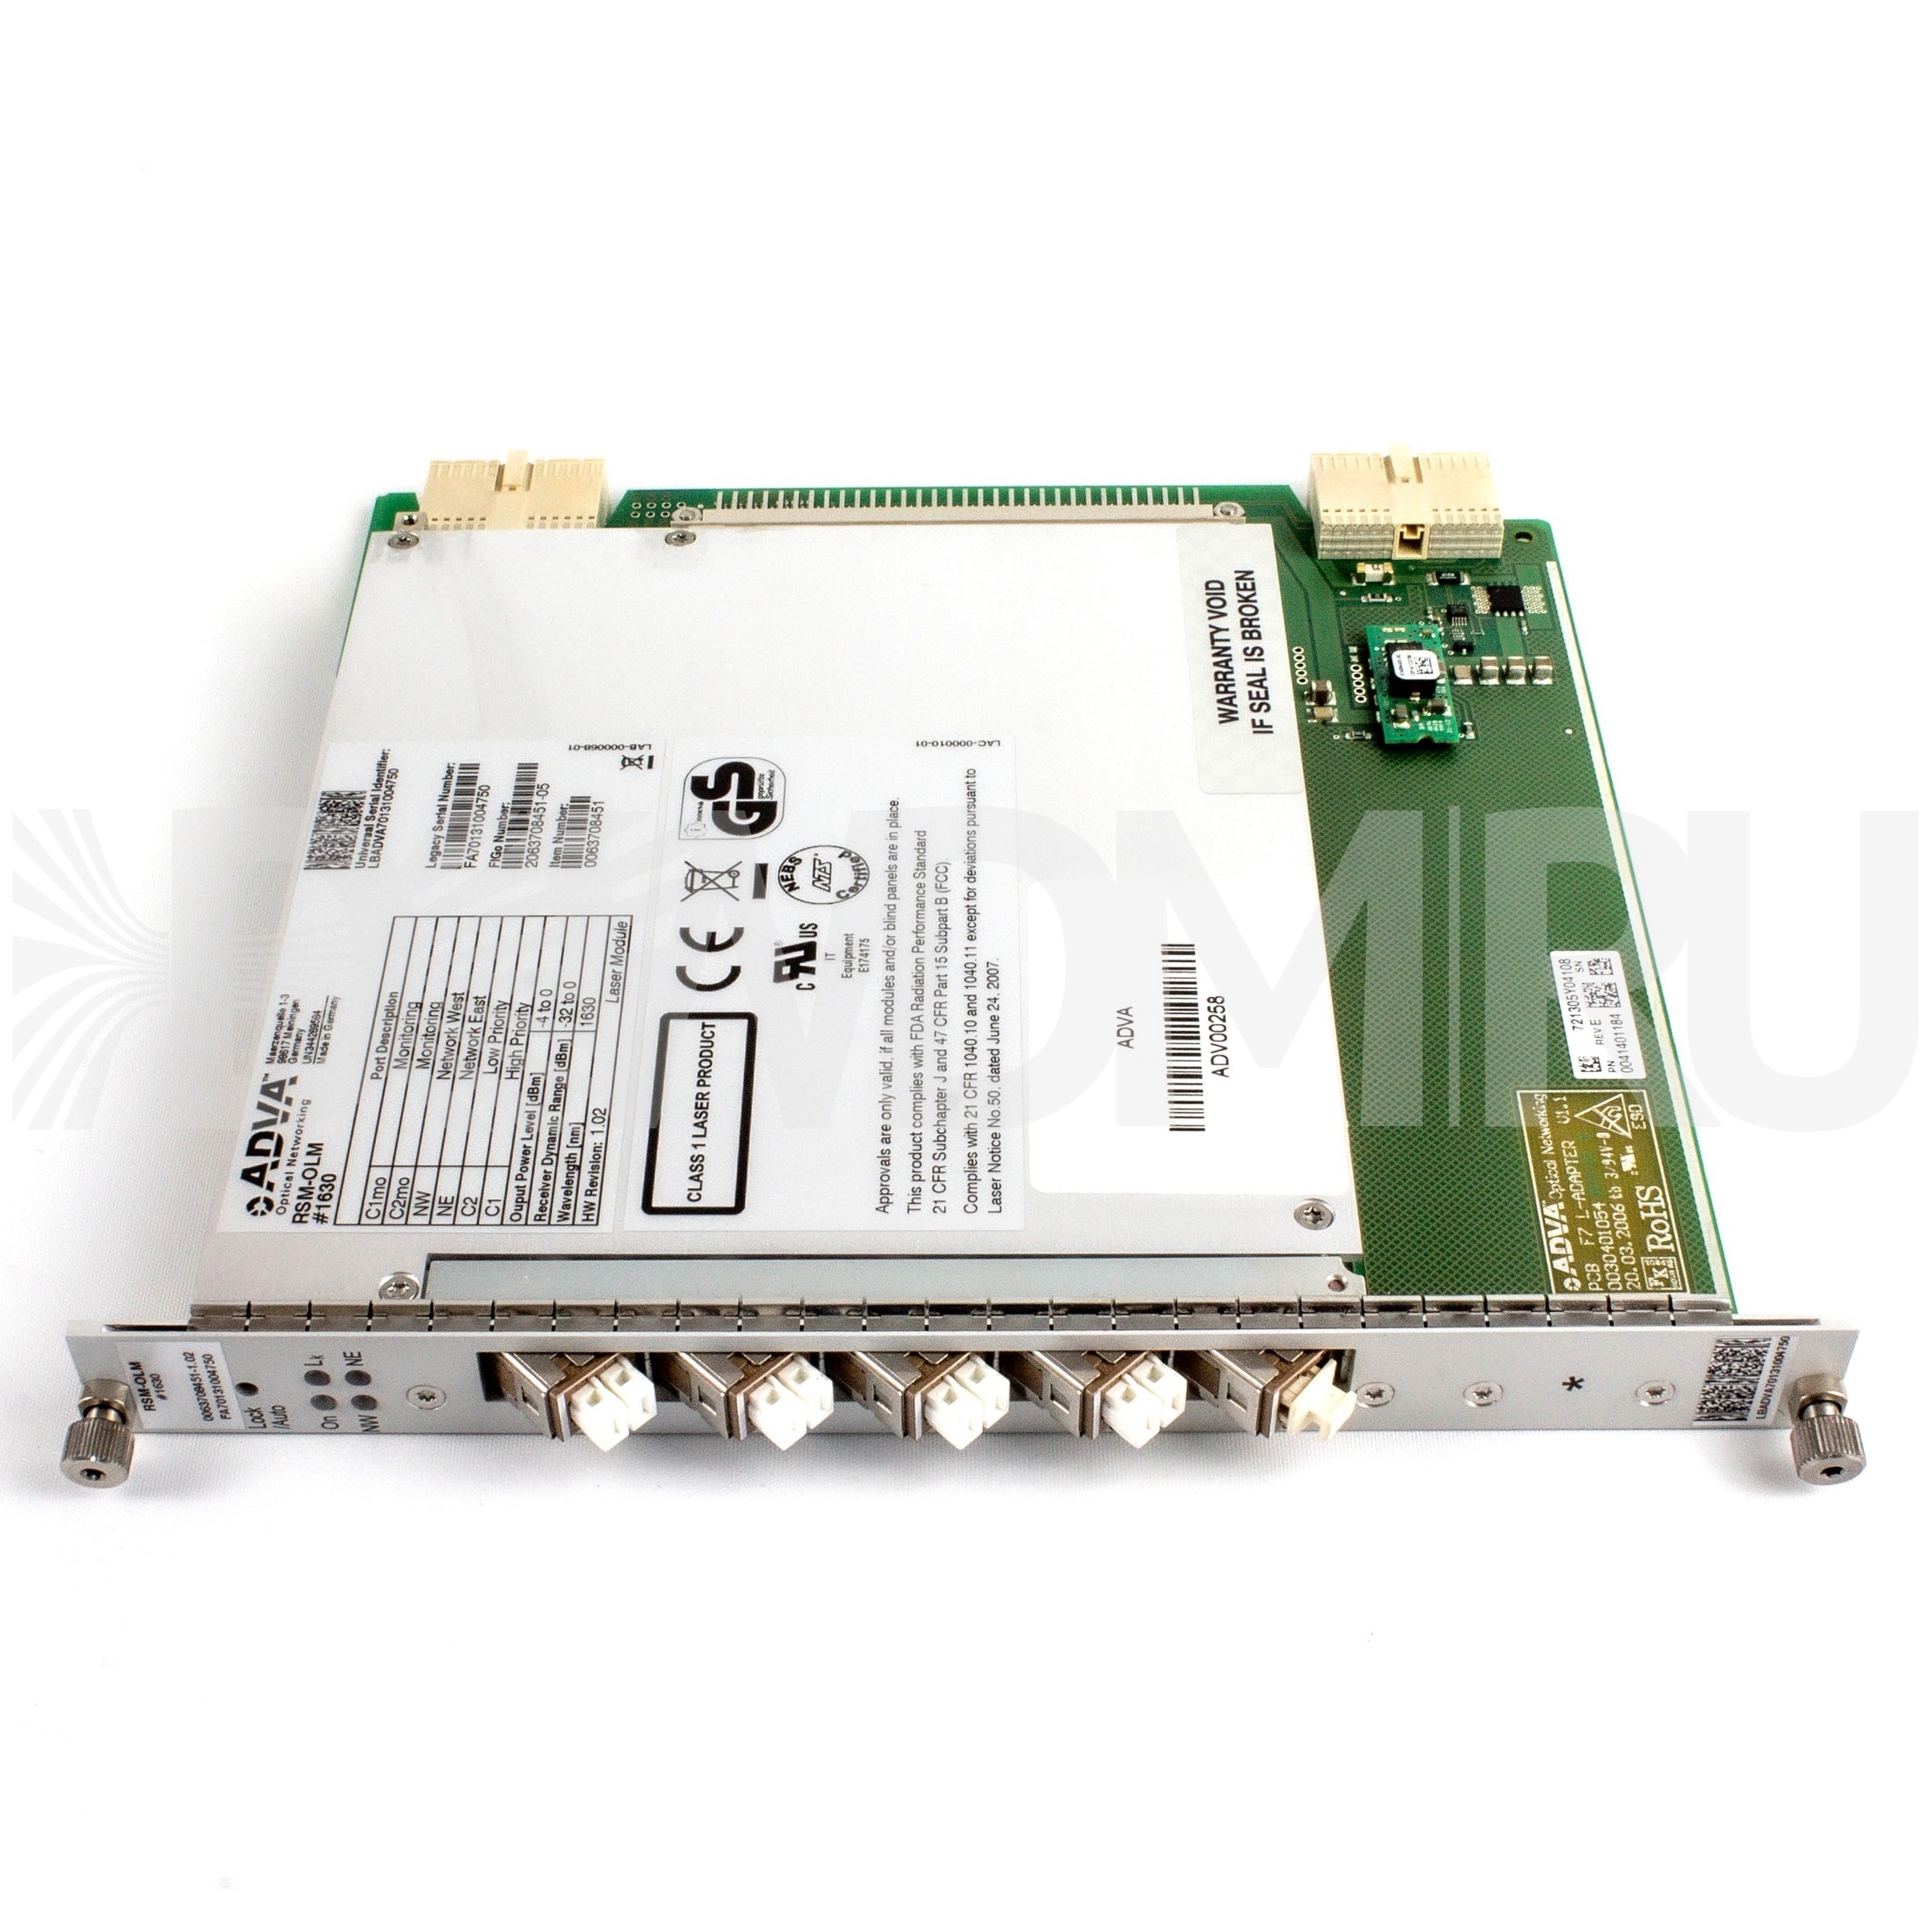 RSM-OLM#1630 Remote Switch Module with Optical Line Monitoring ADVA Optical pn